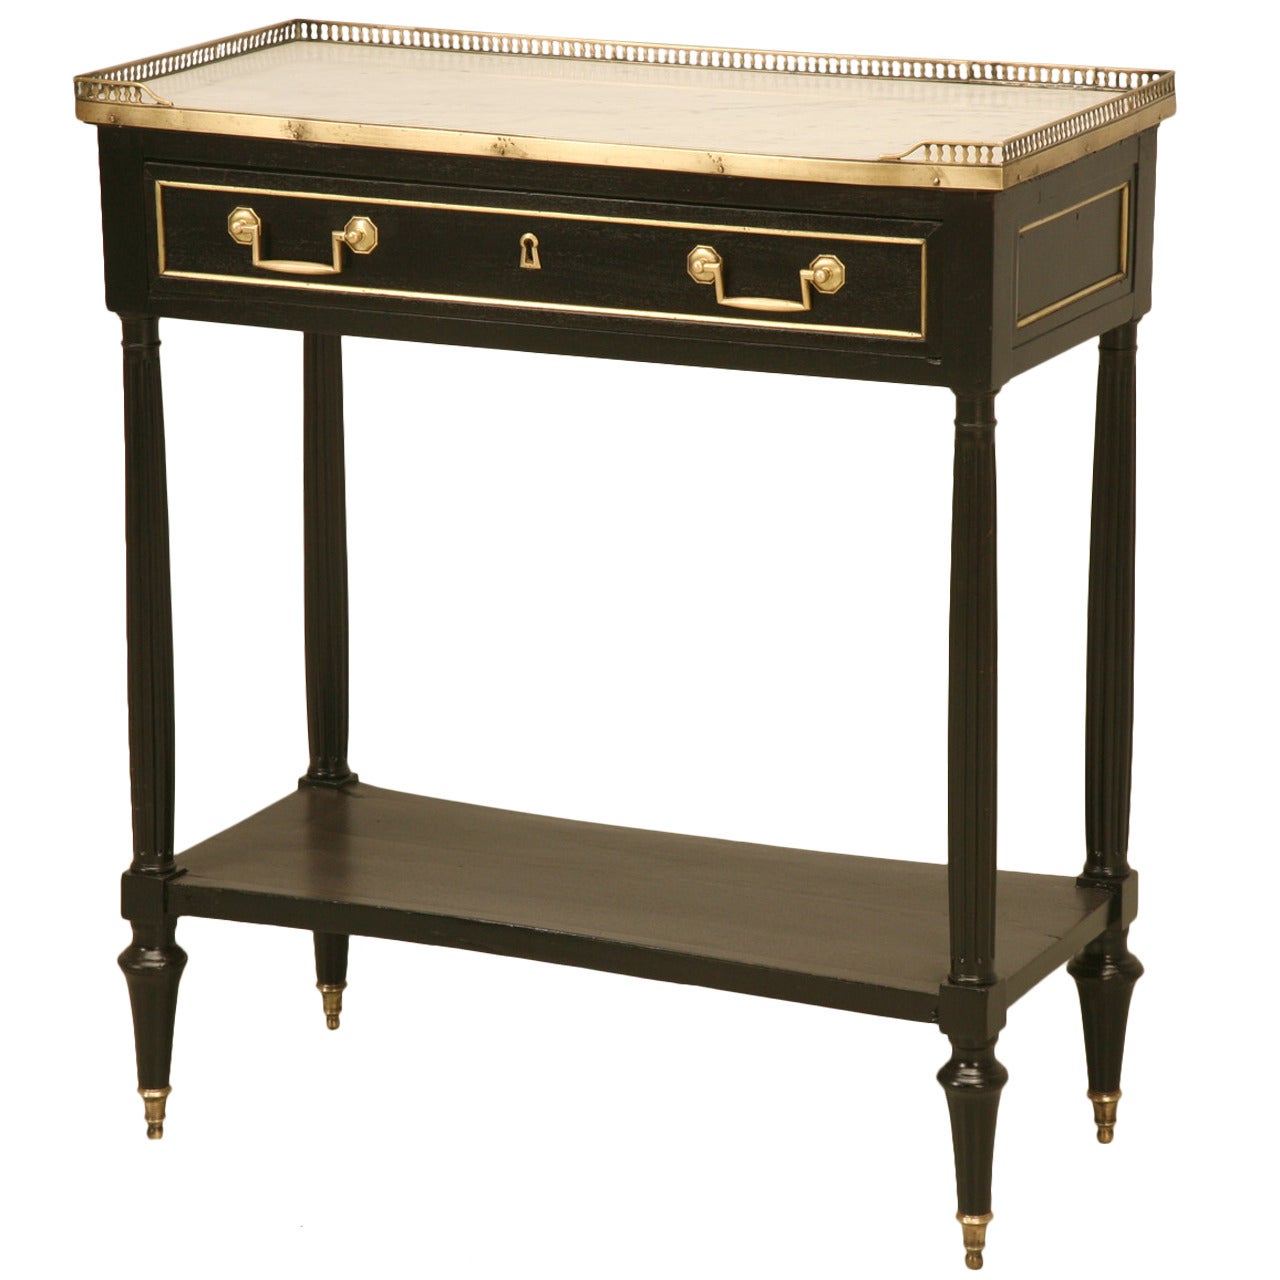 French Antique Console Table in Ebonized Mahogany with a Brass Gallery